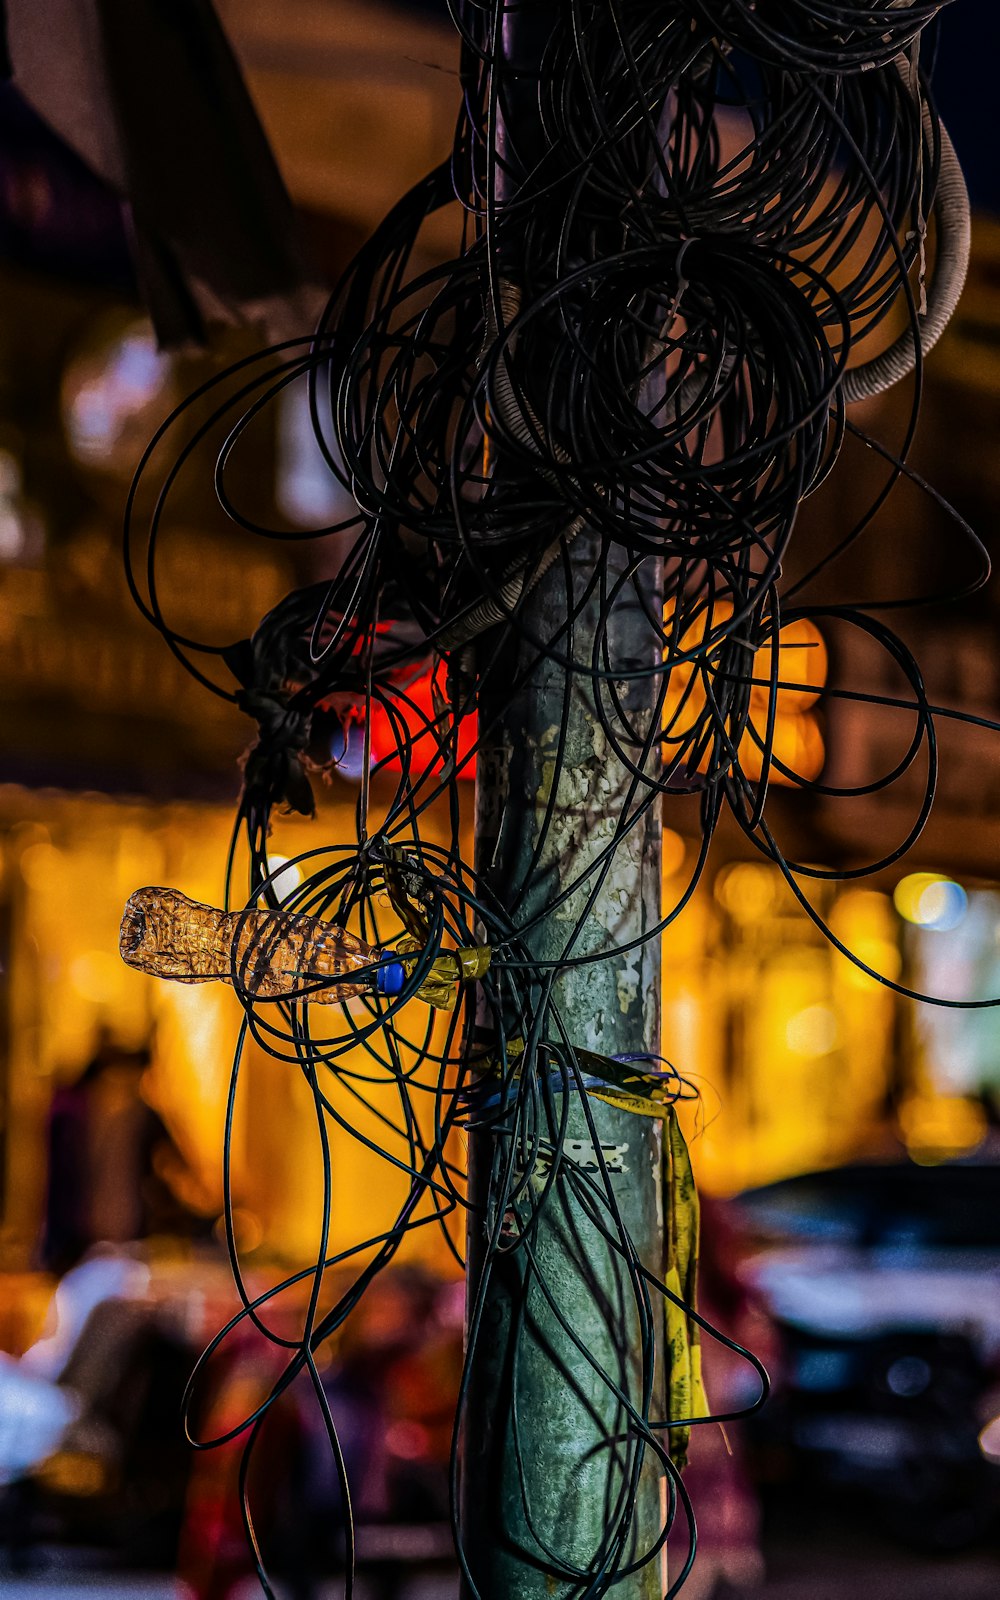 a telephone pole covered in wires and wires